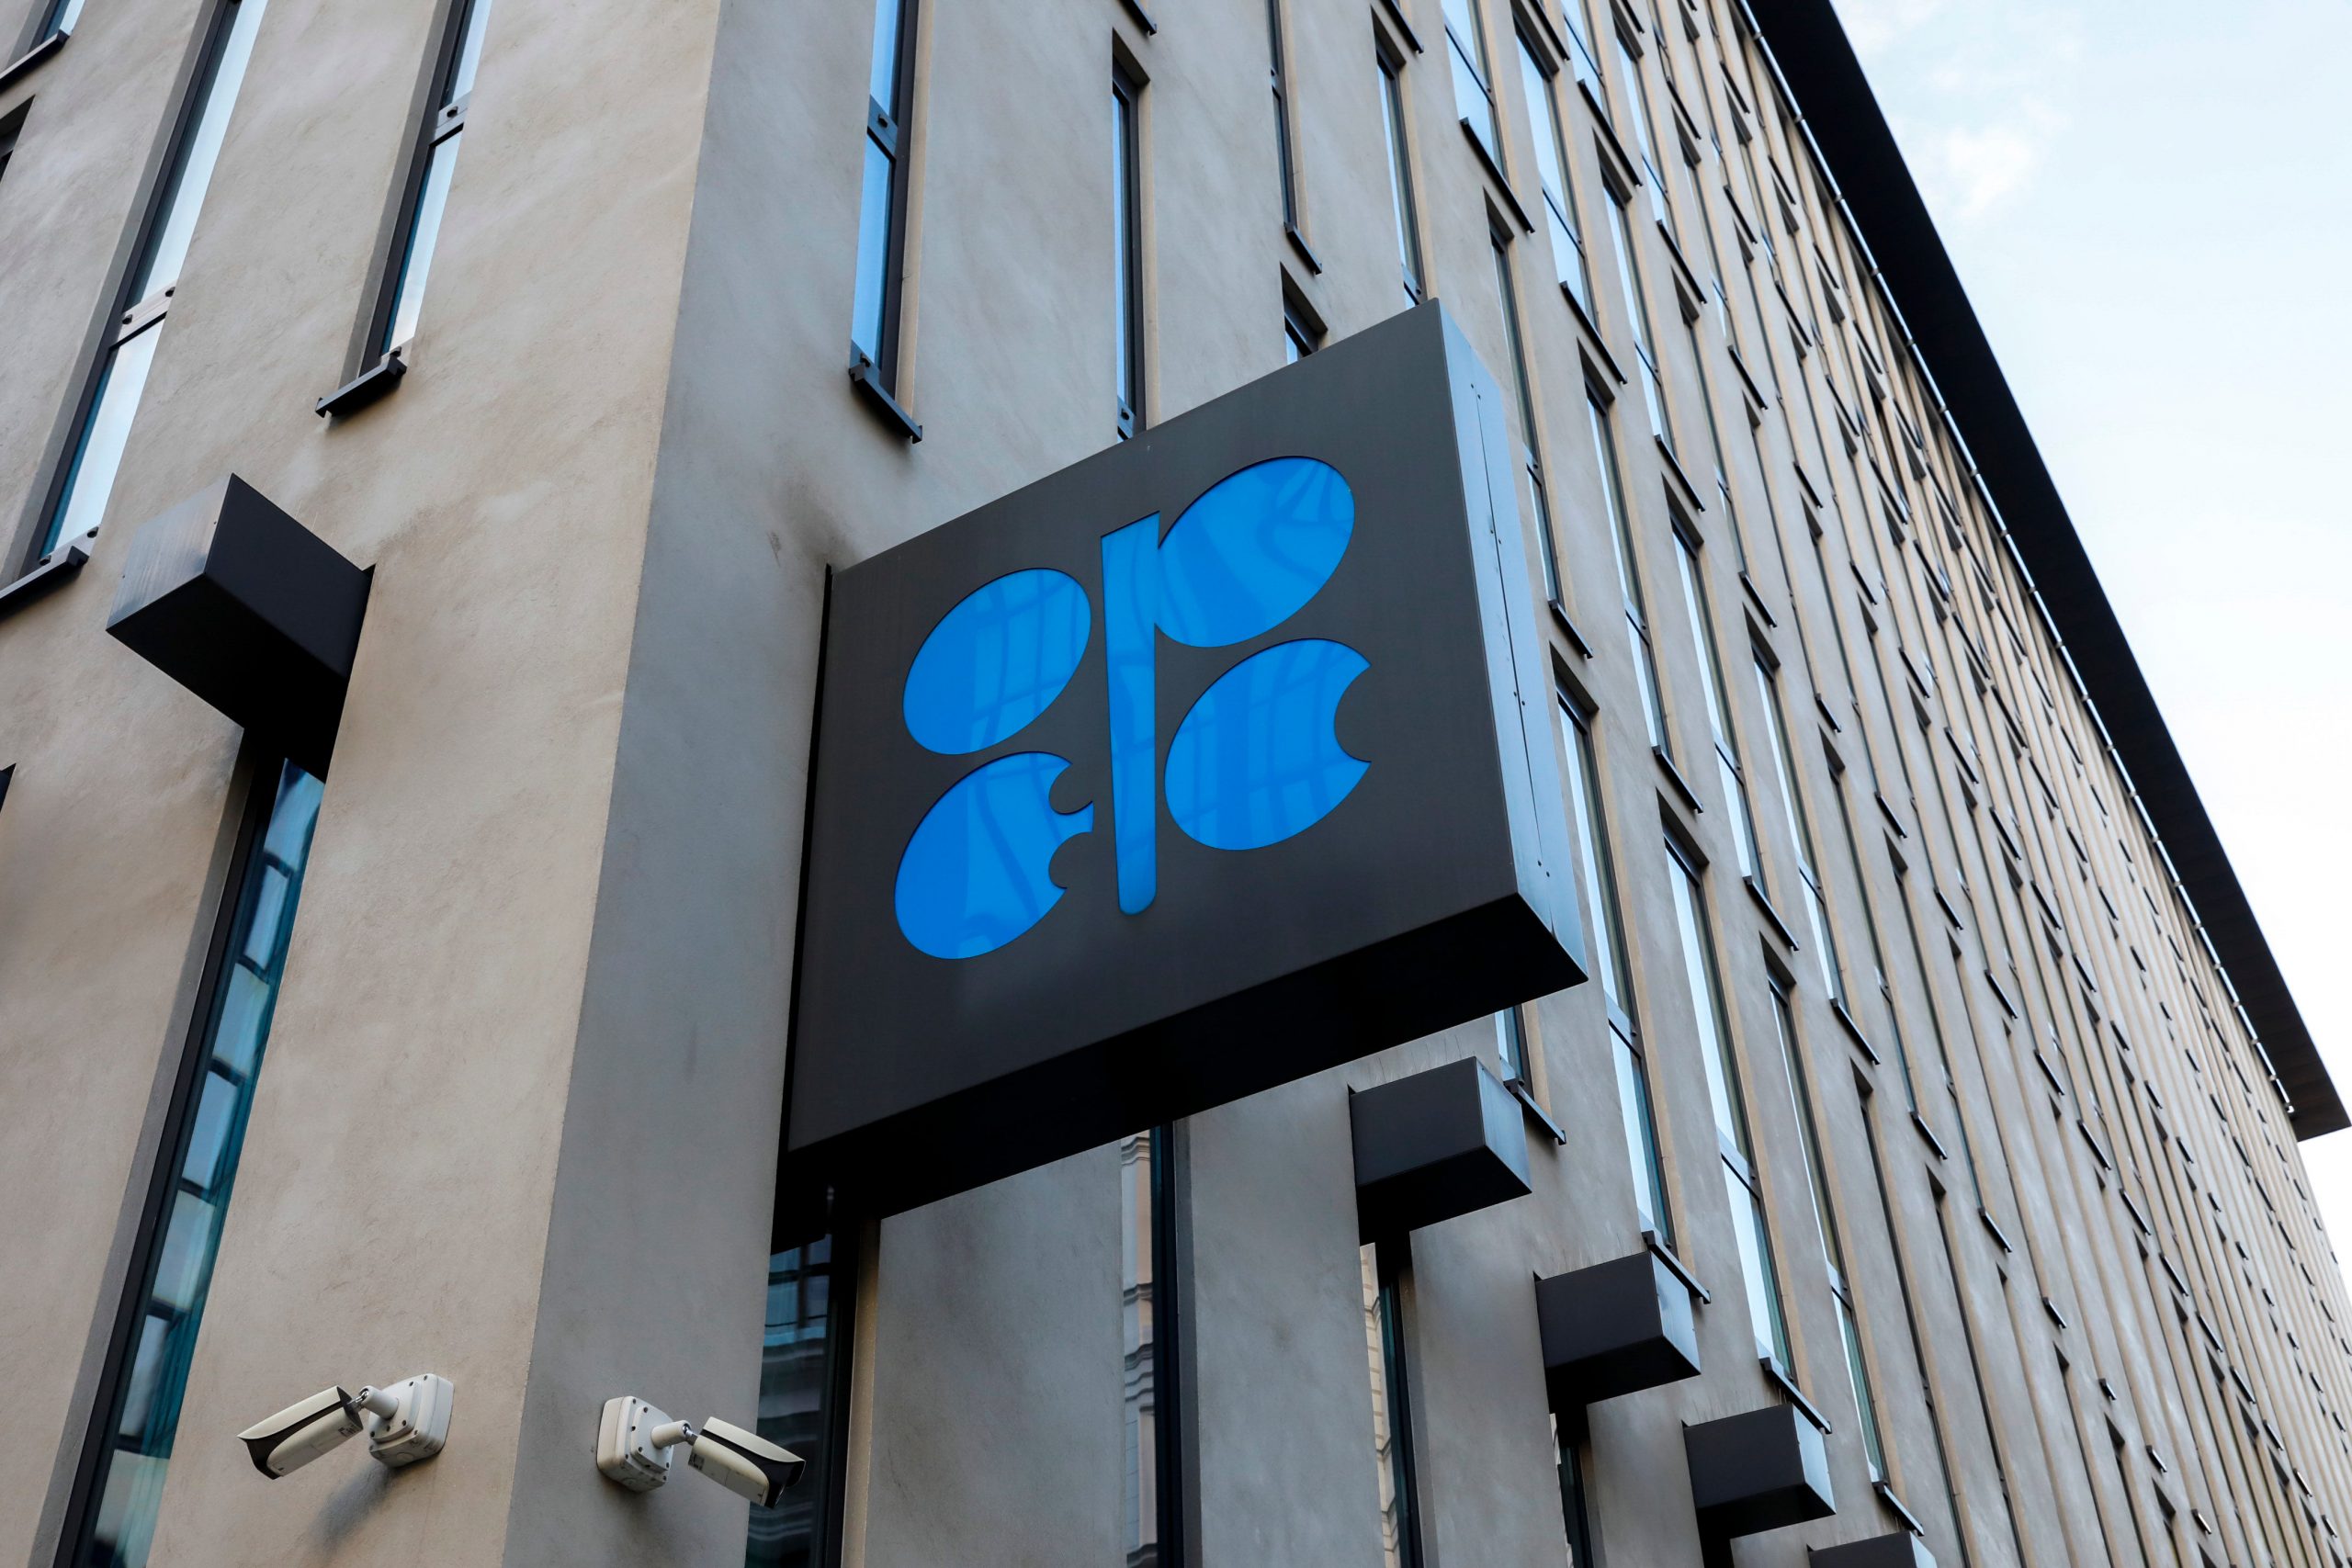 OPEC announces major oil production cut, prices expected to rise: Report